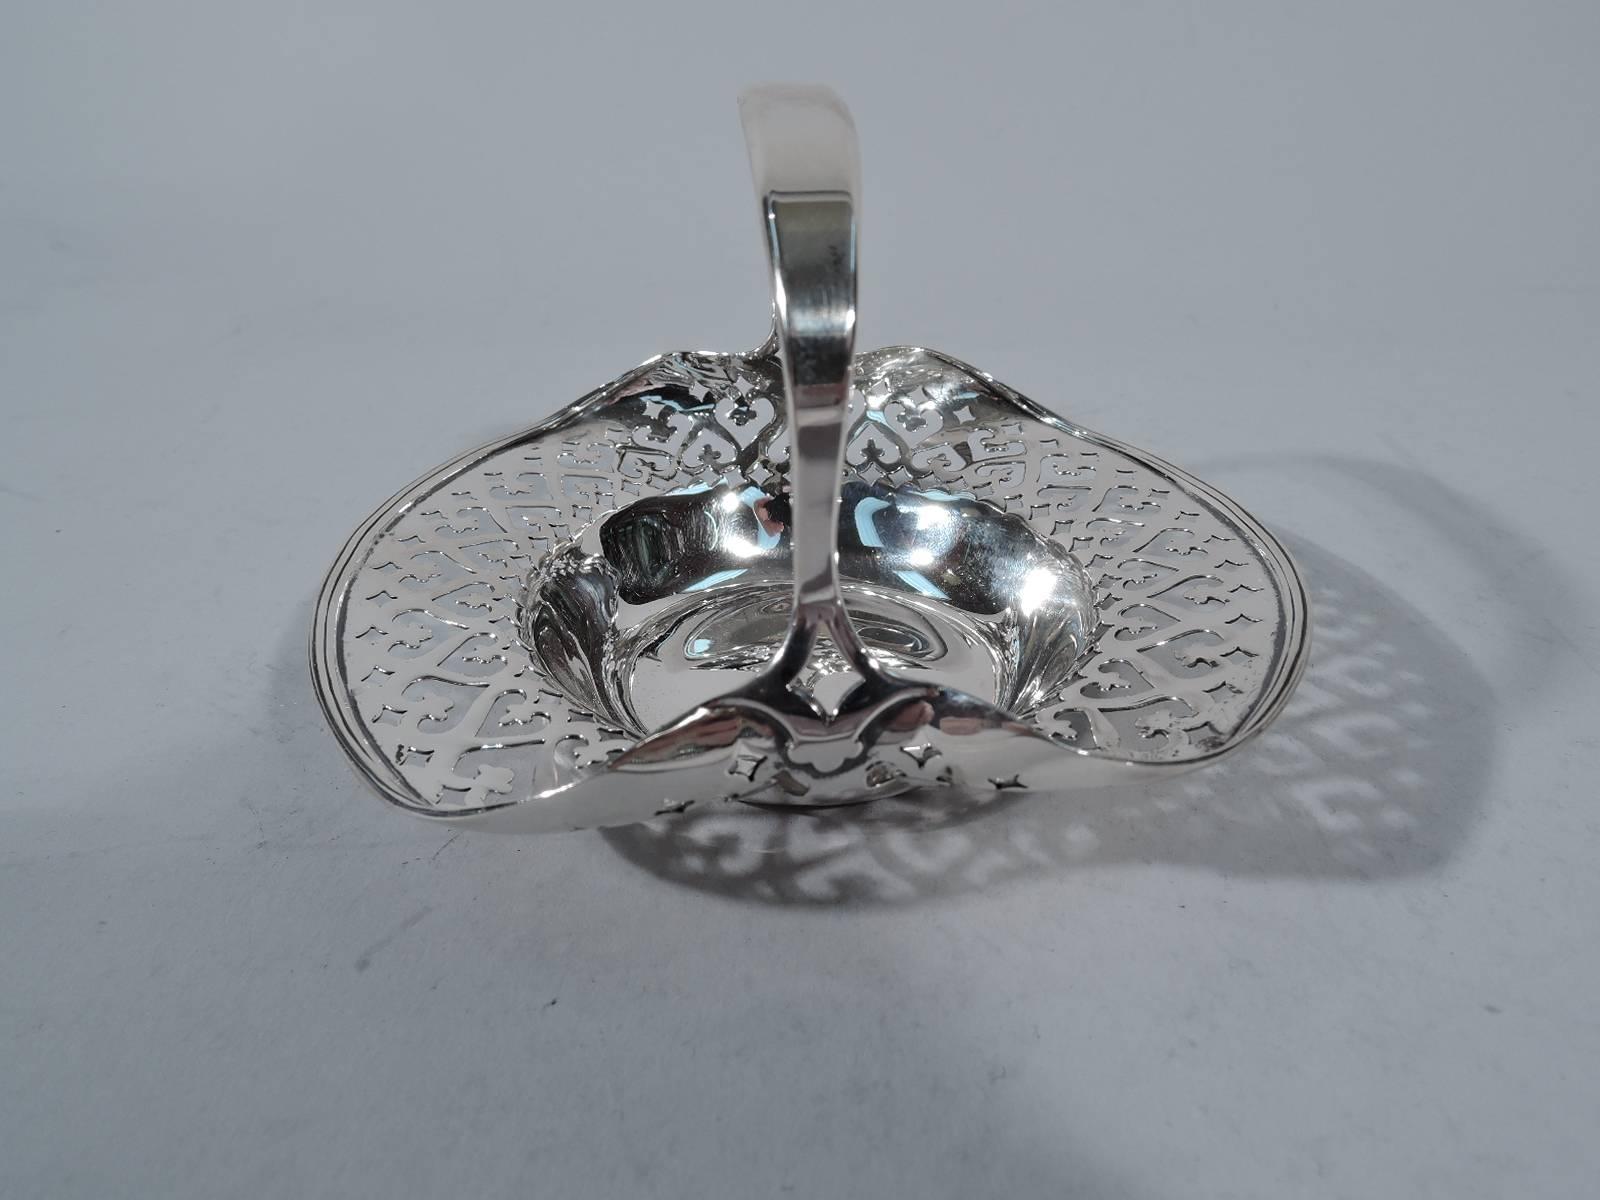 Sweet and old fashioned sterling silver basket. Made by Tiffany & Co. in New York, circa 1910. Circular well and pierced and molded rim. Sides “tugged” upwards by stationary bracket handle. Hallmark includes pattern no. 16665 and director’s letter m